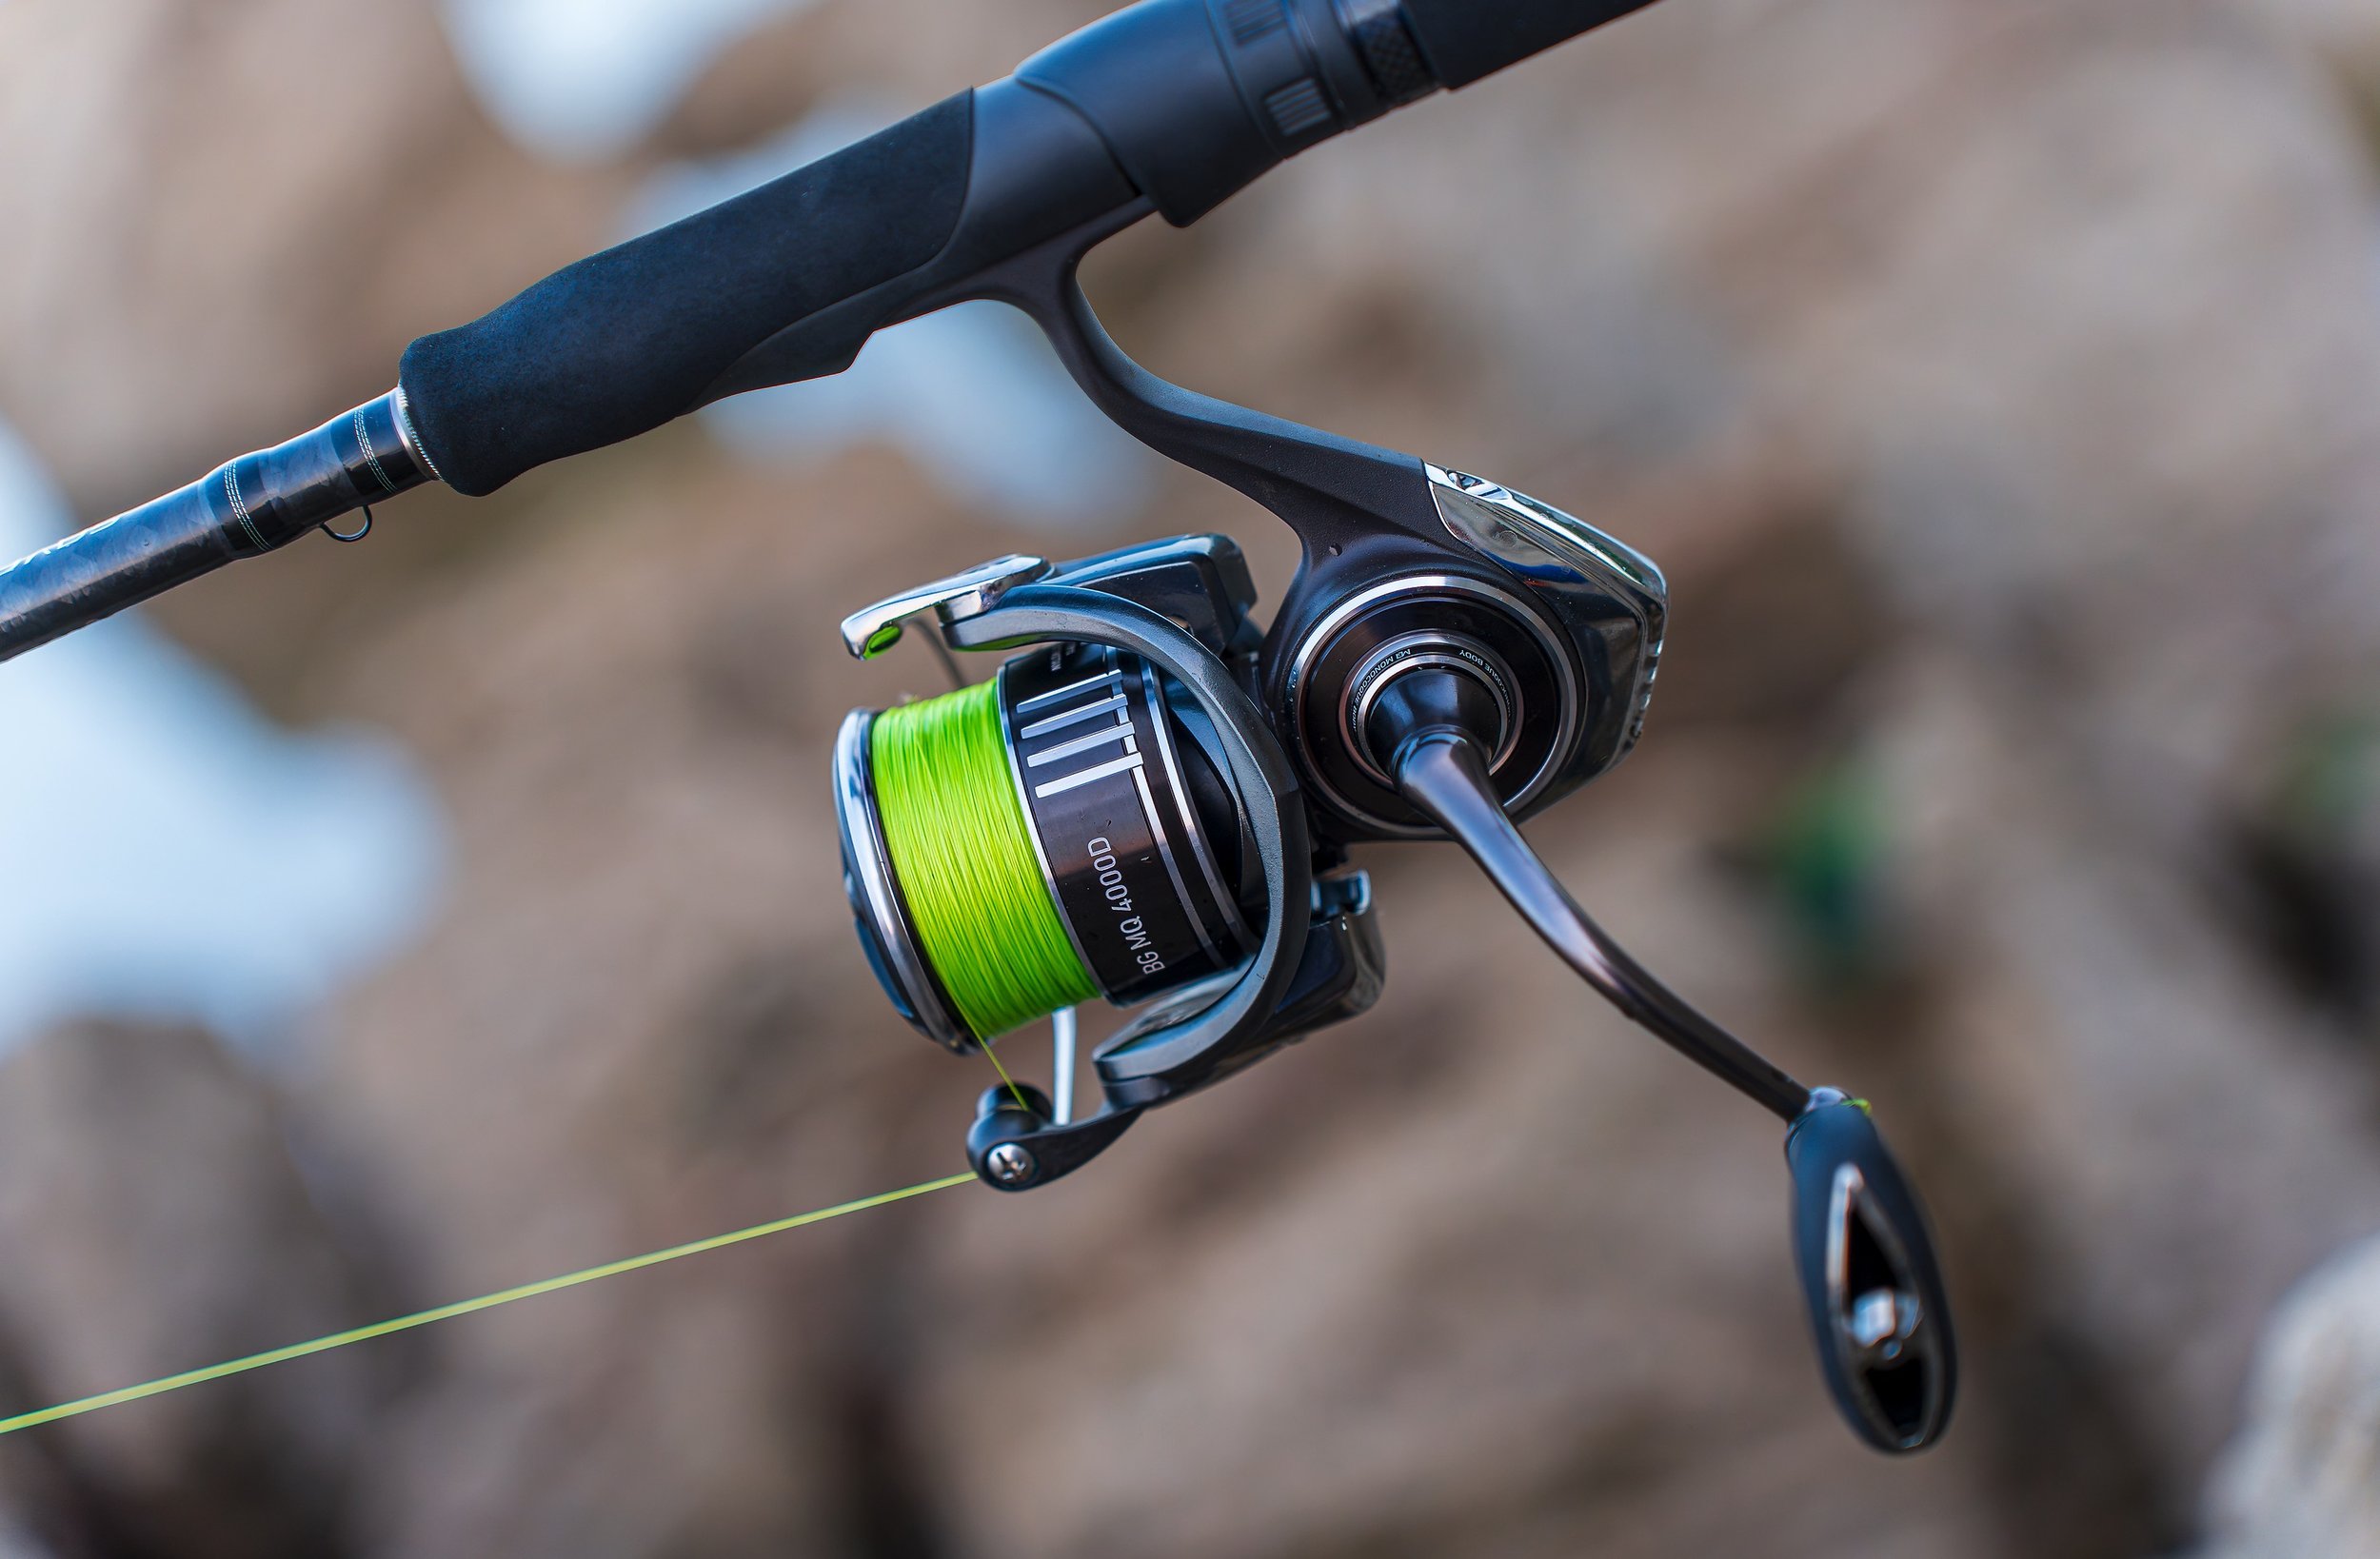 Tiny spinning reel suggestions please photo added I think